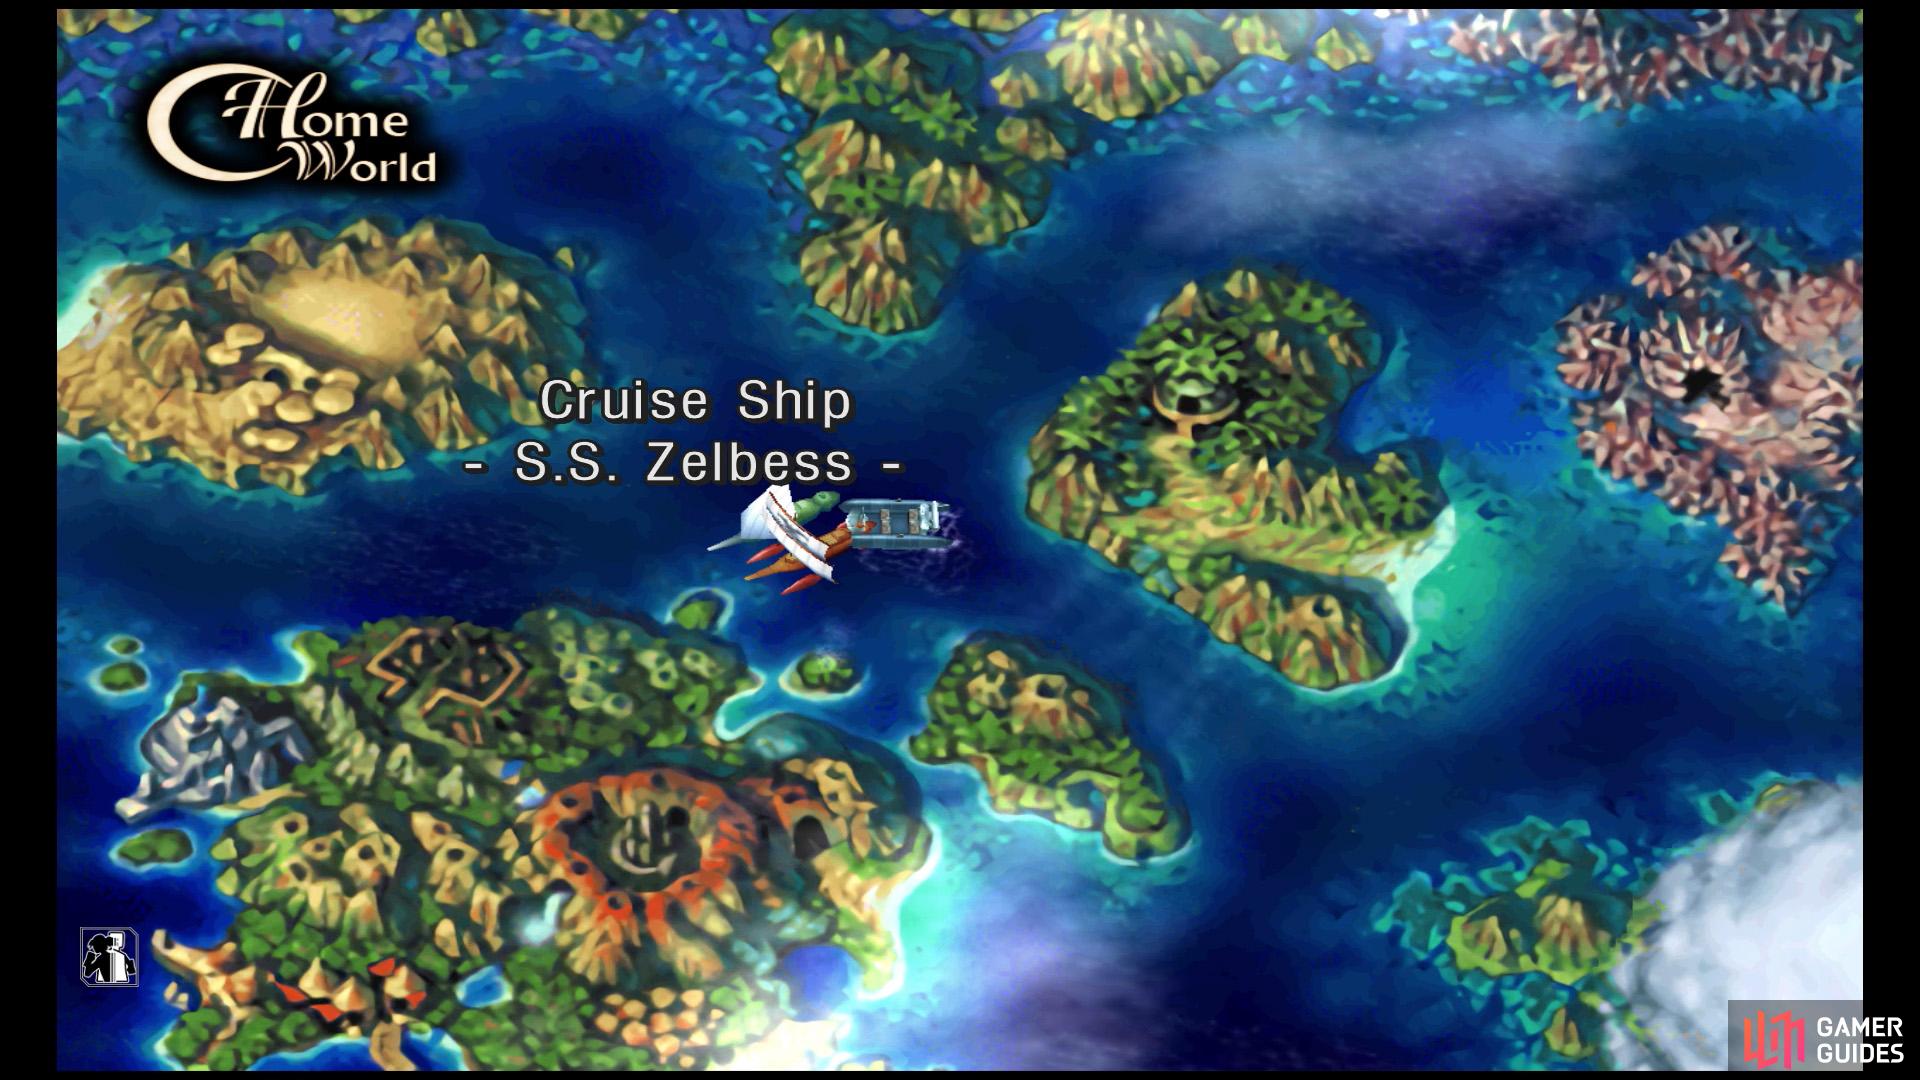 The S.S. Zelbess in Home World.